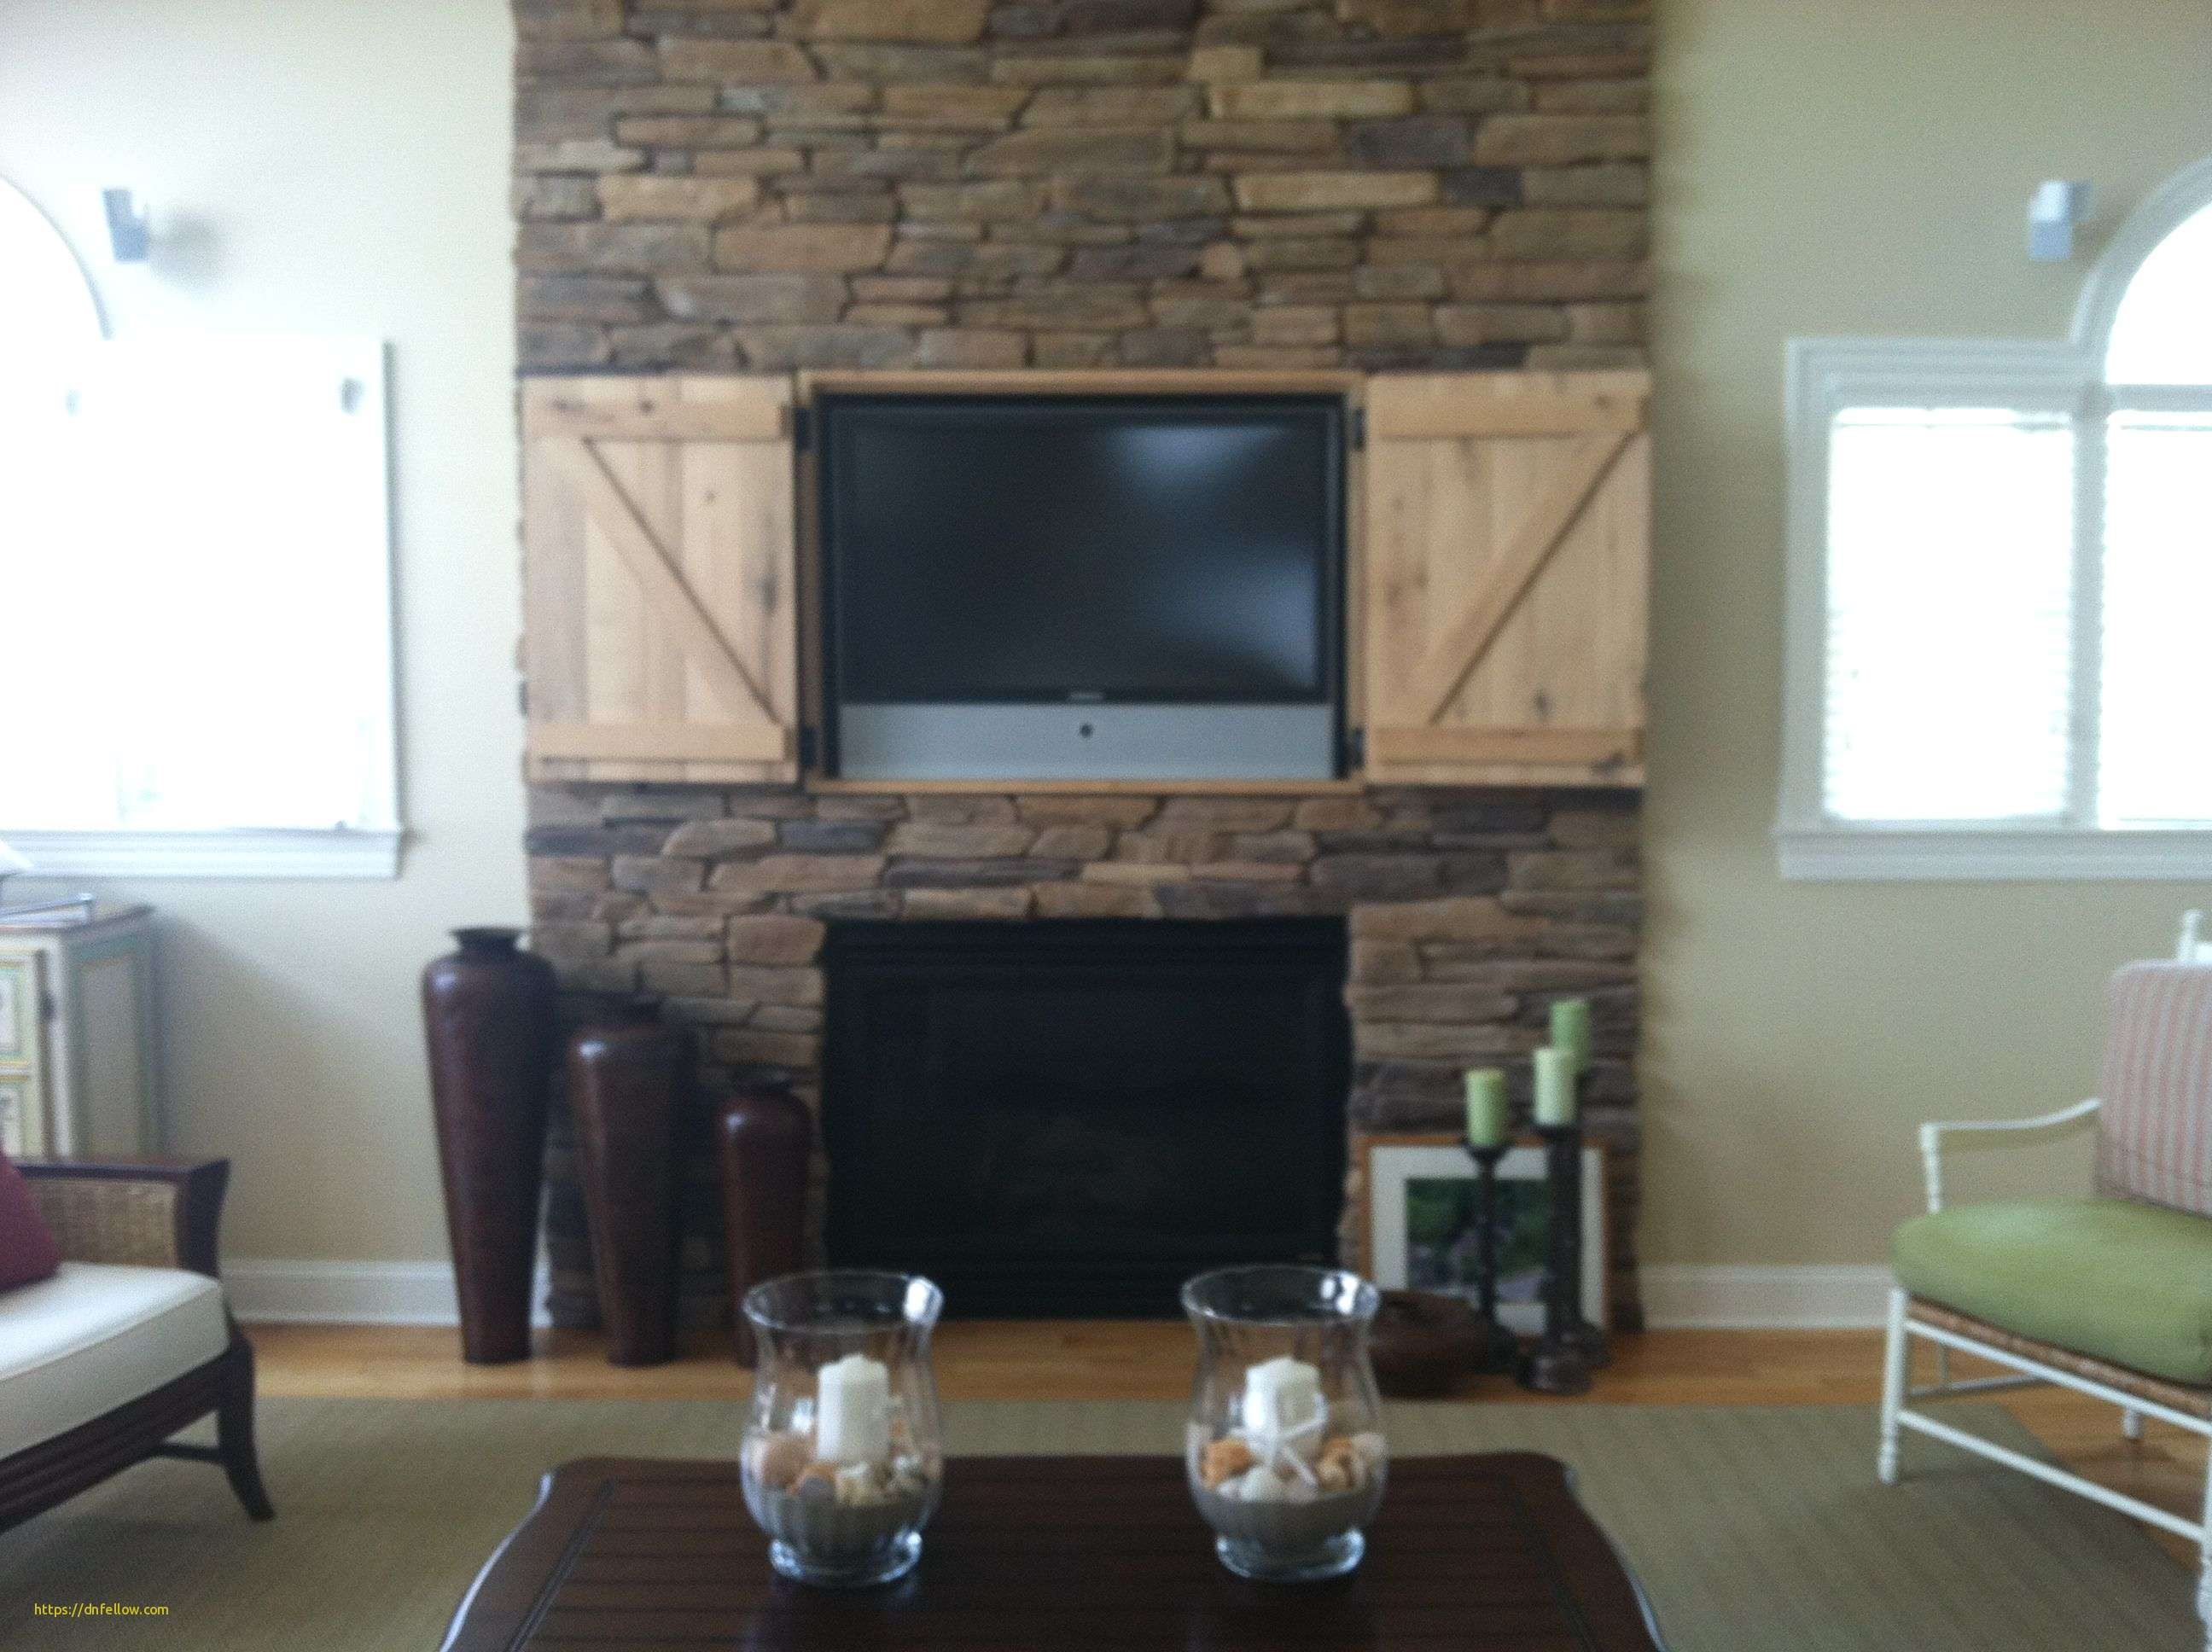 Cover Brick Fireplace with Stone Unique Lovely How to Cover Old Brick Fireplace Home Design